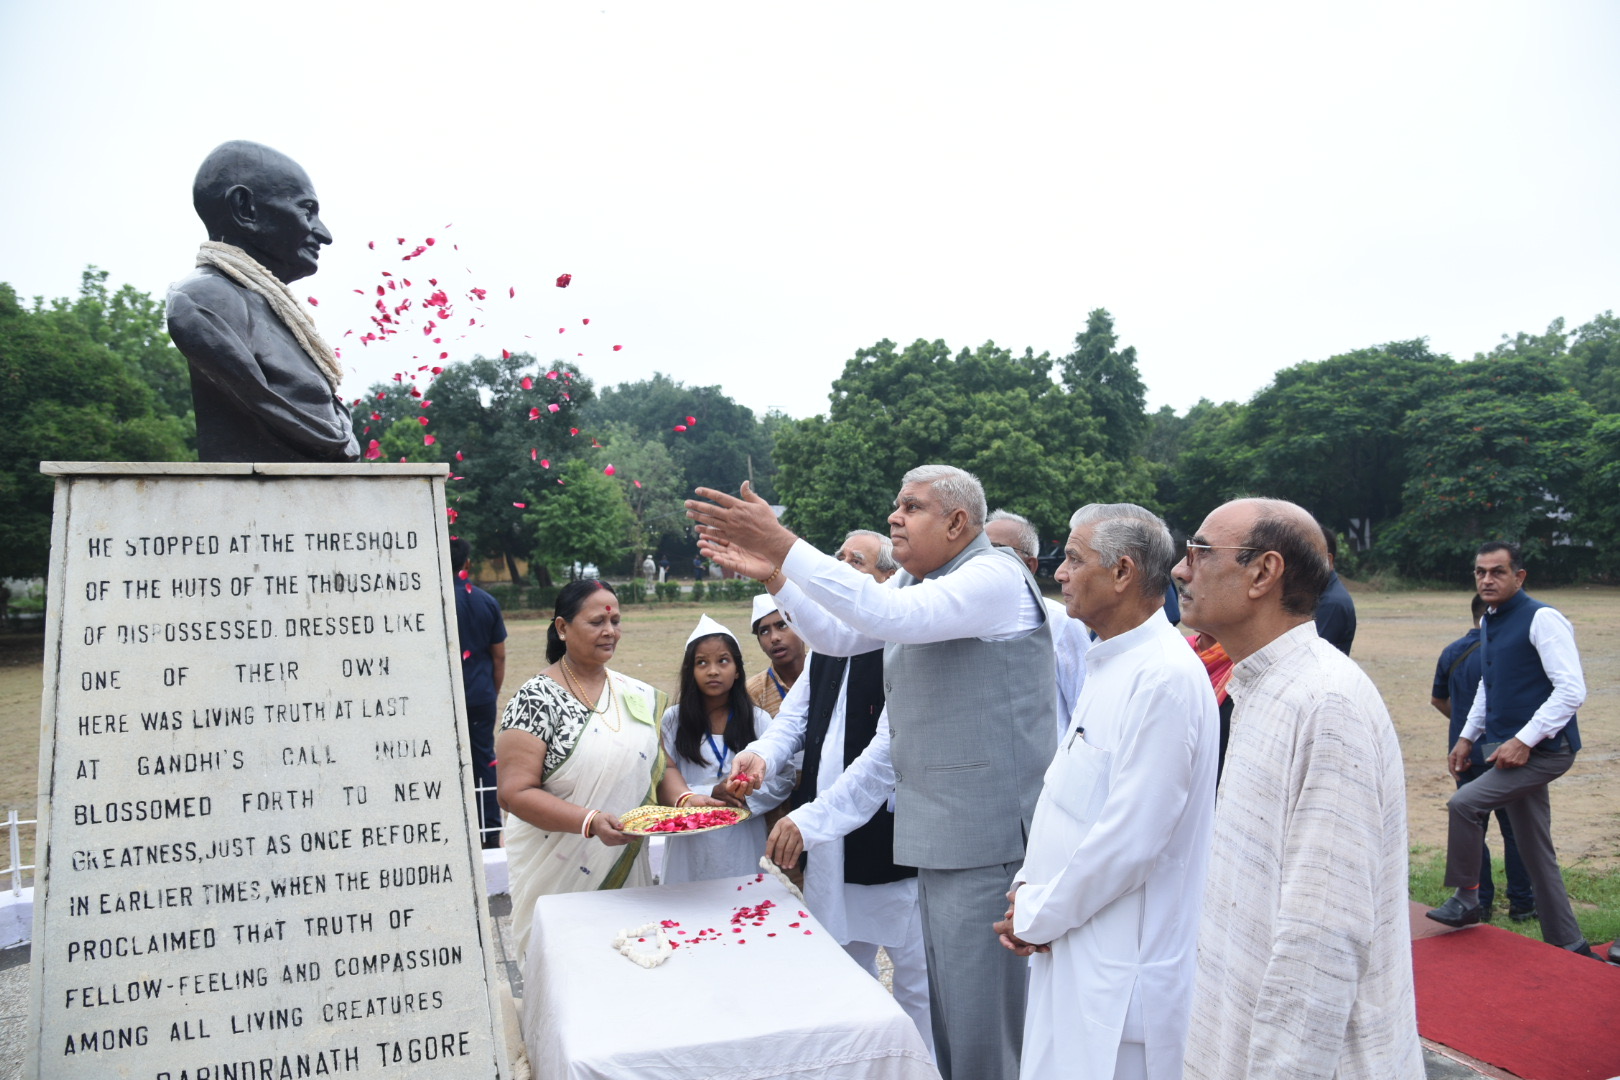 The Vice President, Shri Jagdeep Dhankhar paying floral tributes to the Father of the Nation, Mahatma Gandhi at Gandhi Ashram in New Delhi on 24 September 2022.